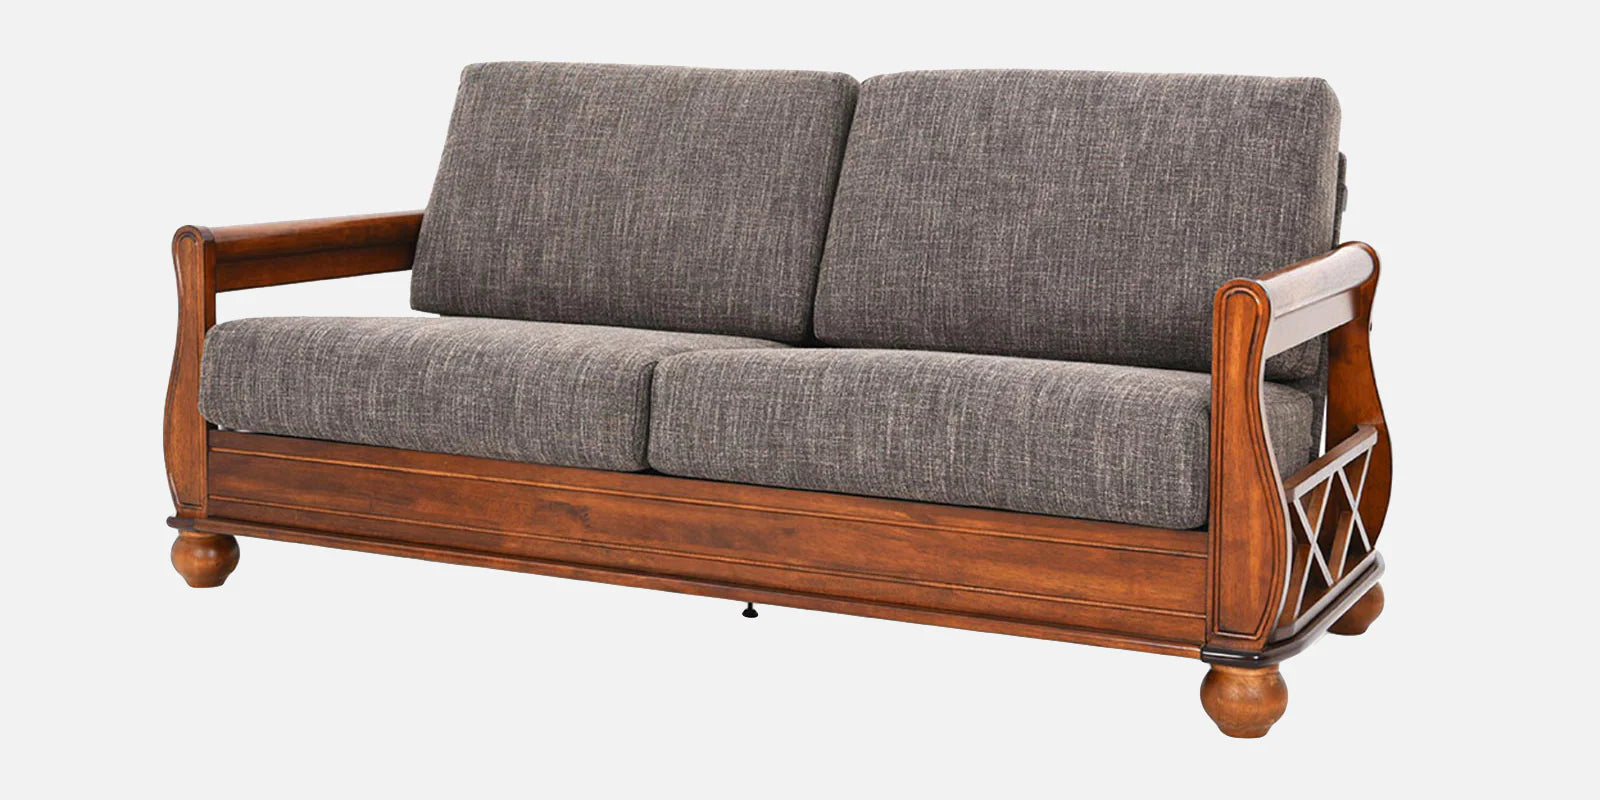 Solid Wood 3 Seater Sofa in Brown Colour